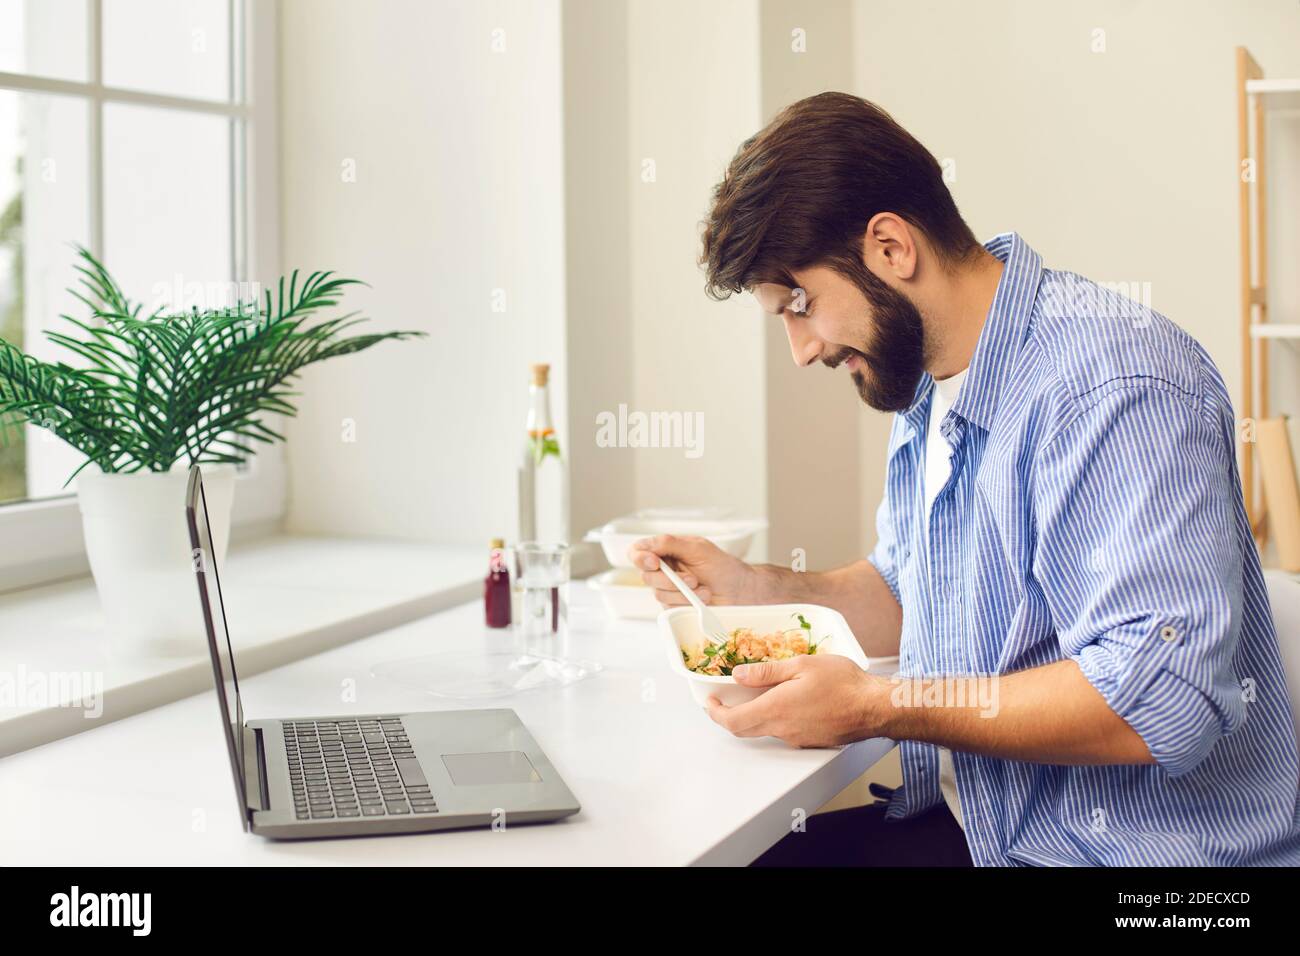 Busy young man eating takeaway food during lunch break at home or in the office Stock Photo